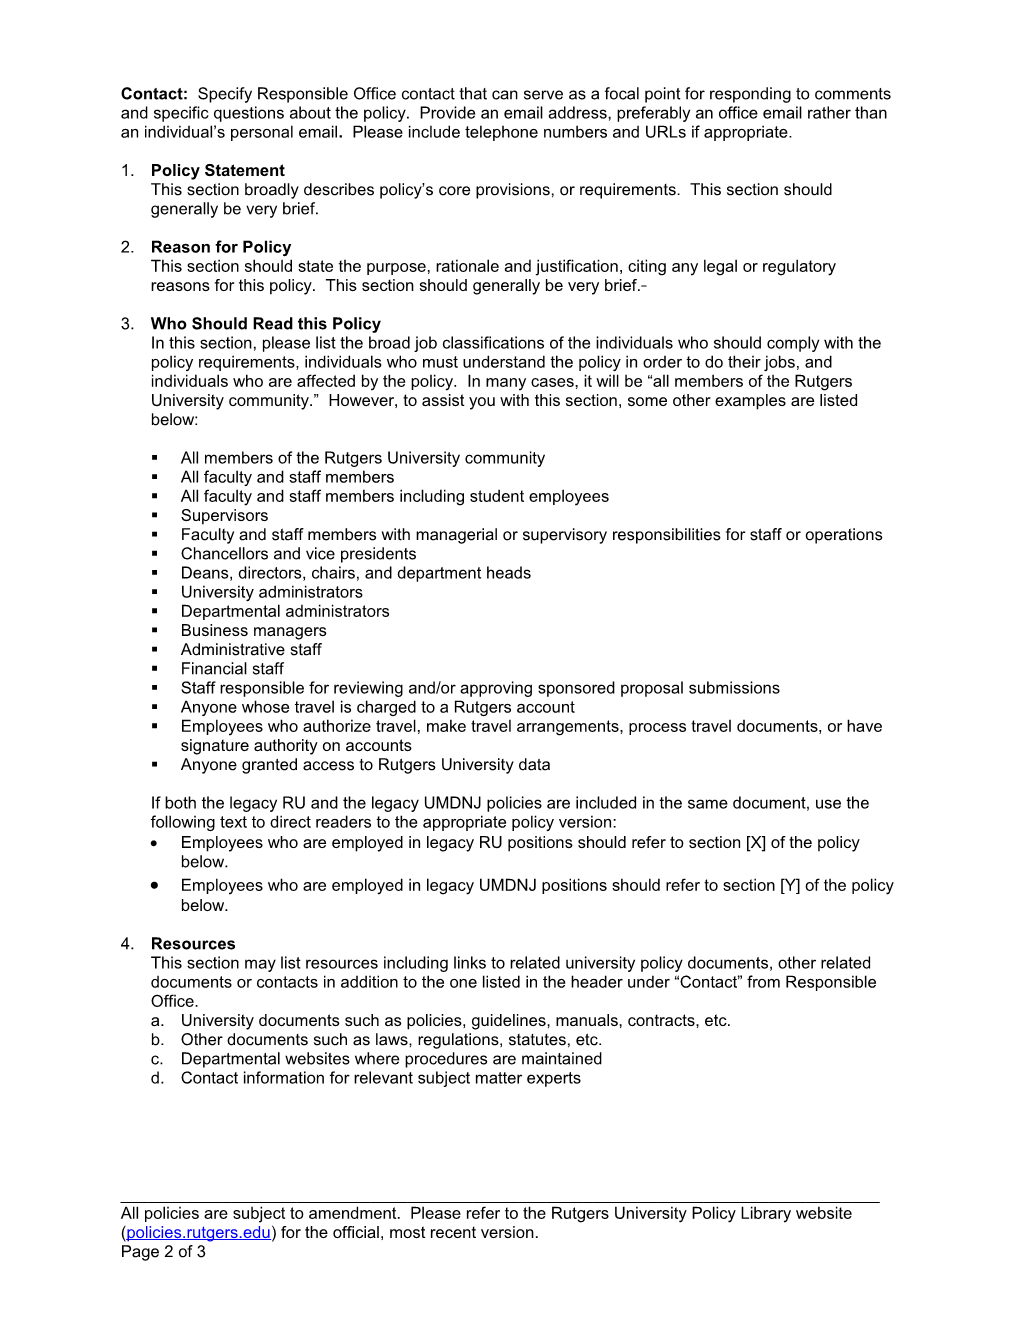 University Policy (Template Instructions)